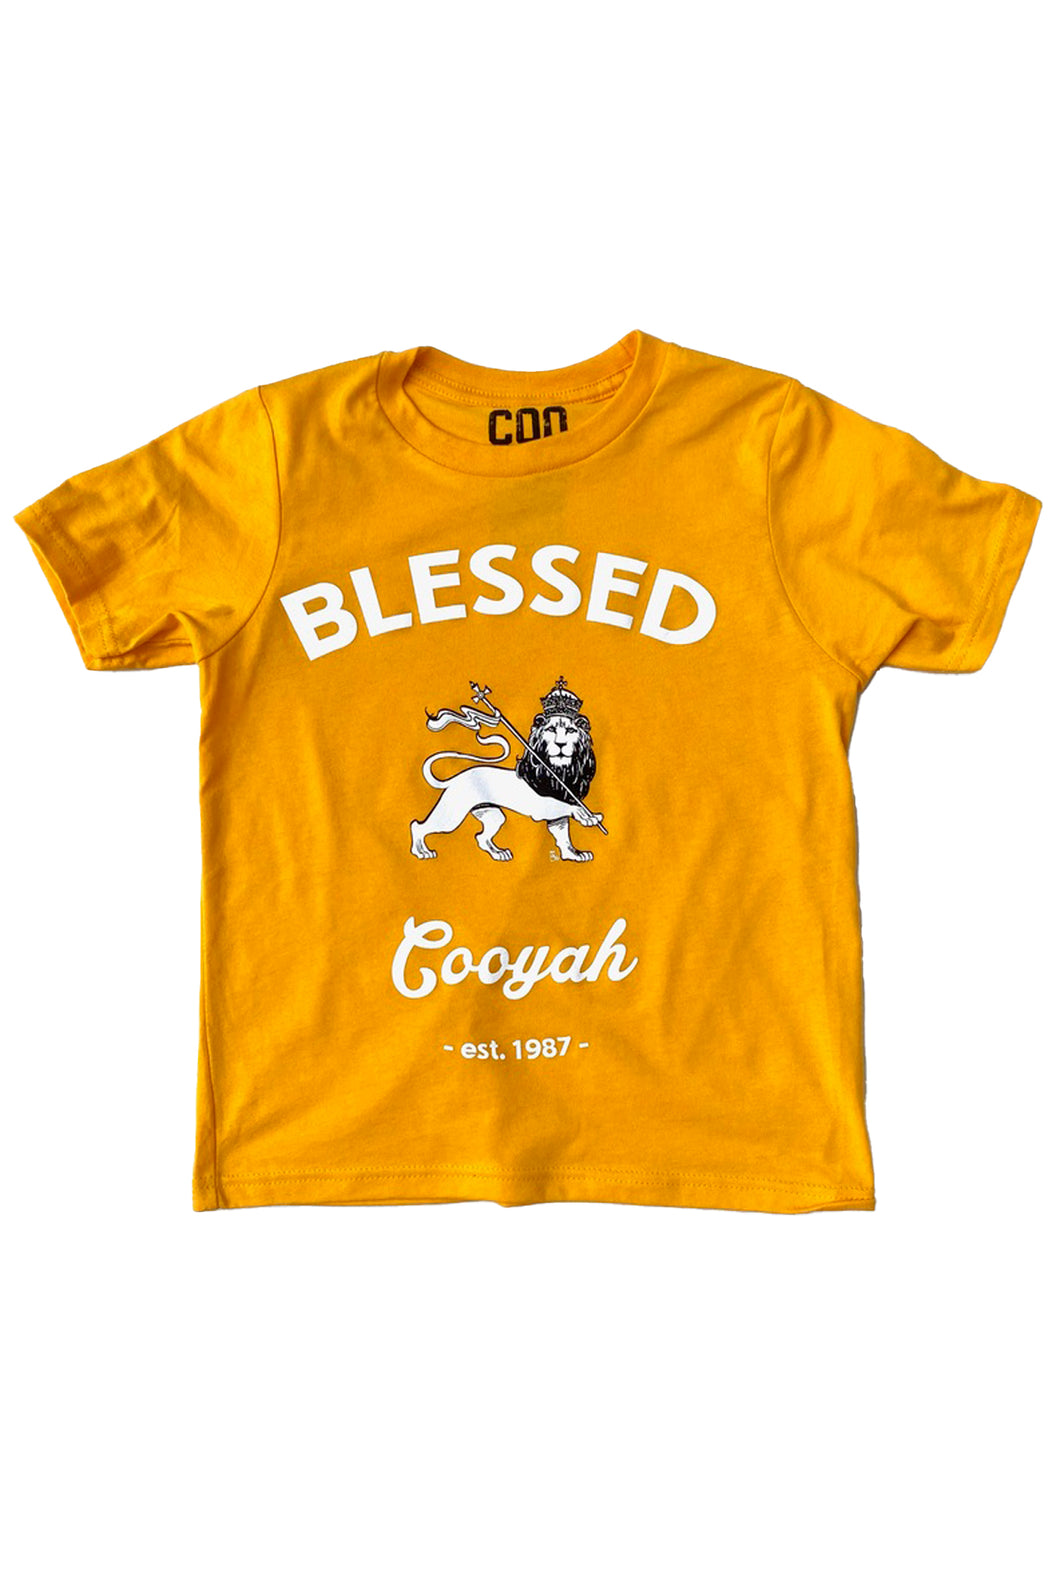 Cooyah Blessed Lion of Judah Kid's Graphic Tee in gold.  Screen printed on soft, 100% ringspun cotton.  We are a Jamaican owned clothing company.  Established in 1987.  IRIE